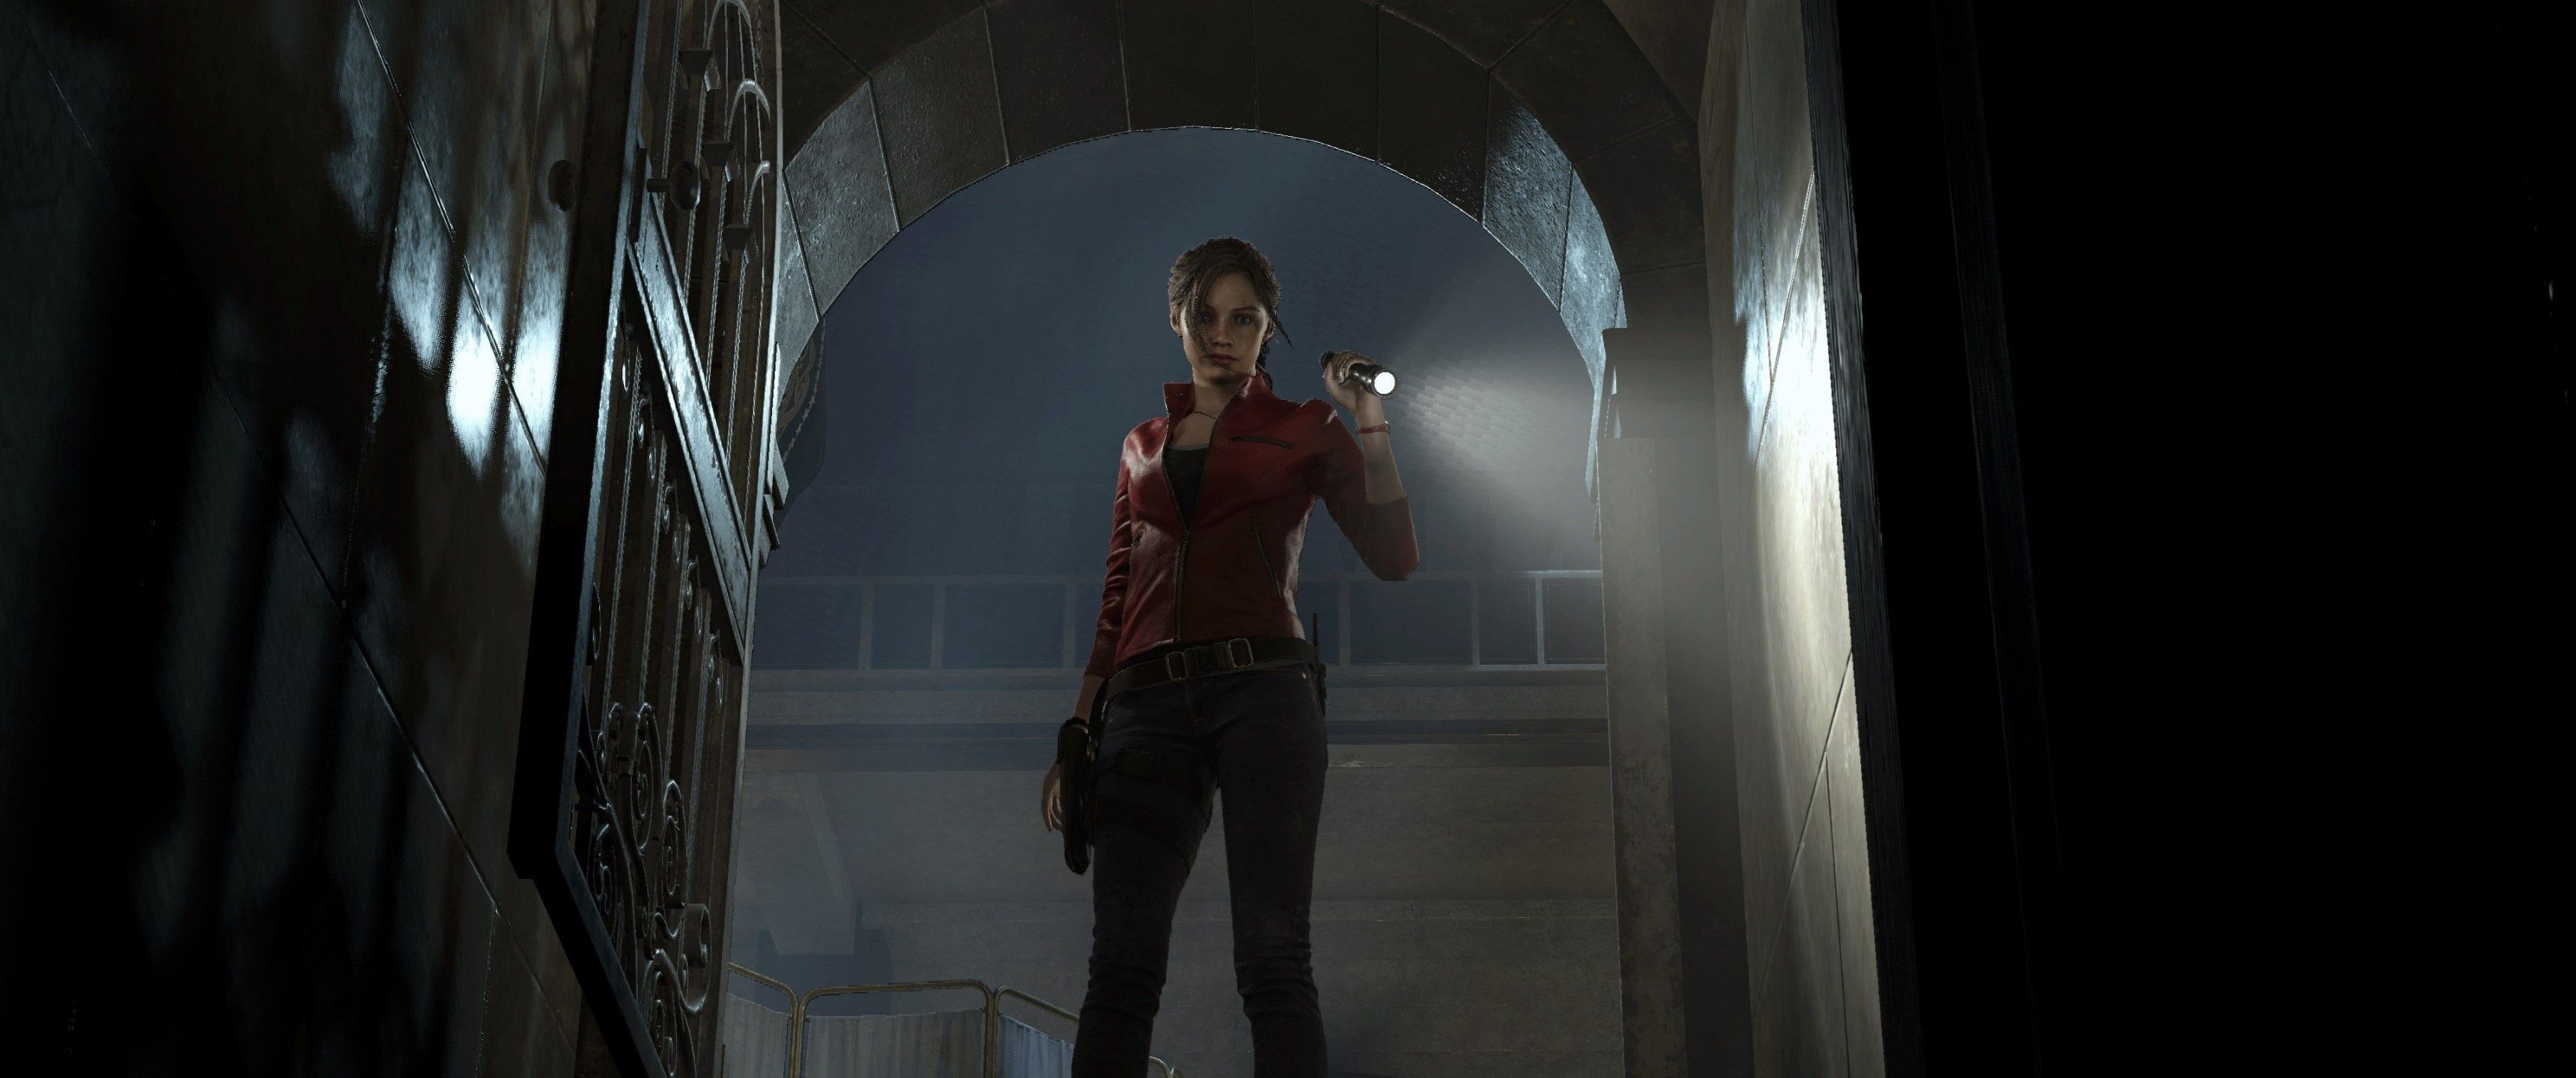 Download 3440x1440 Resident Evil Claire Redfield Wallpaper